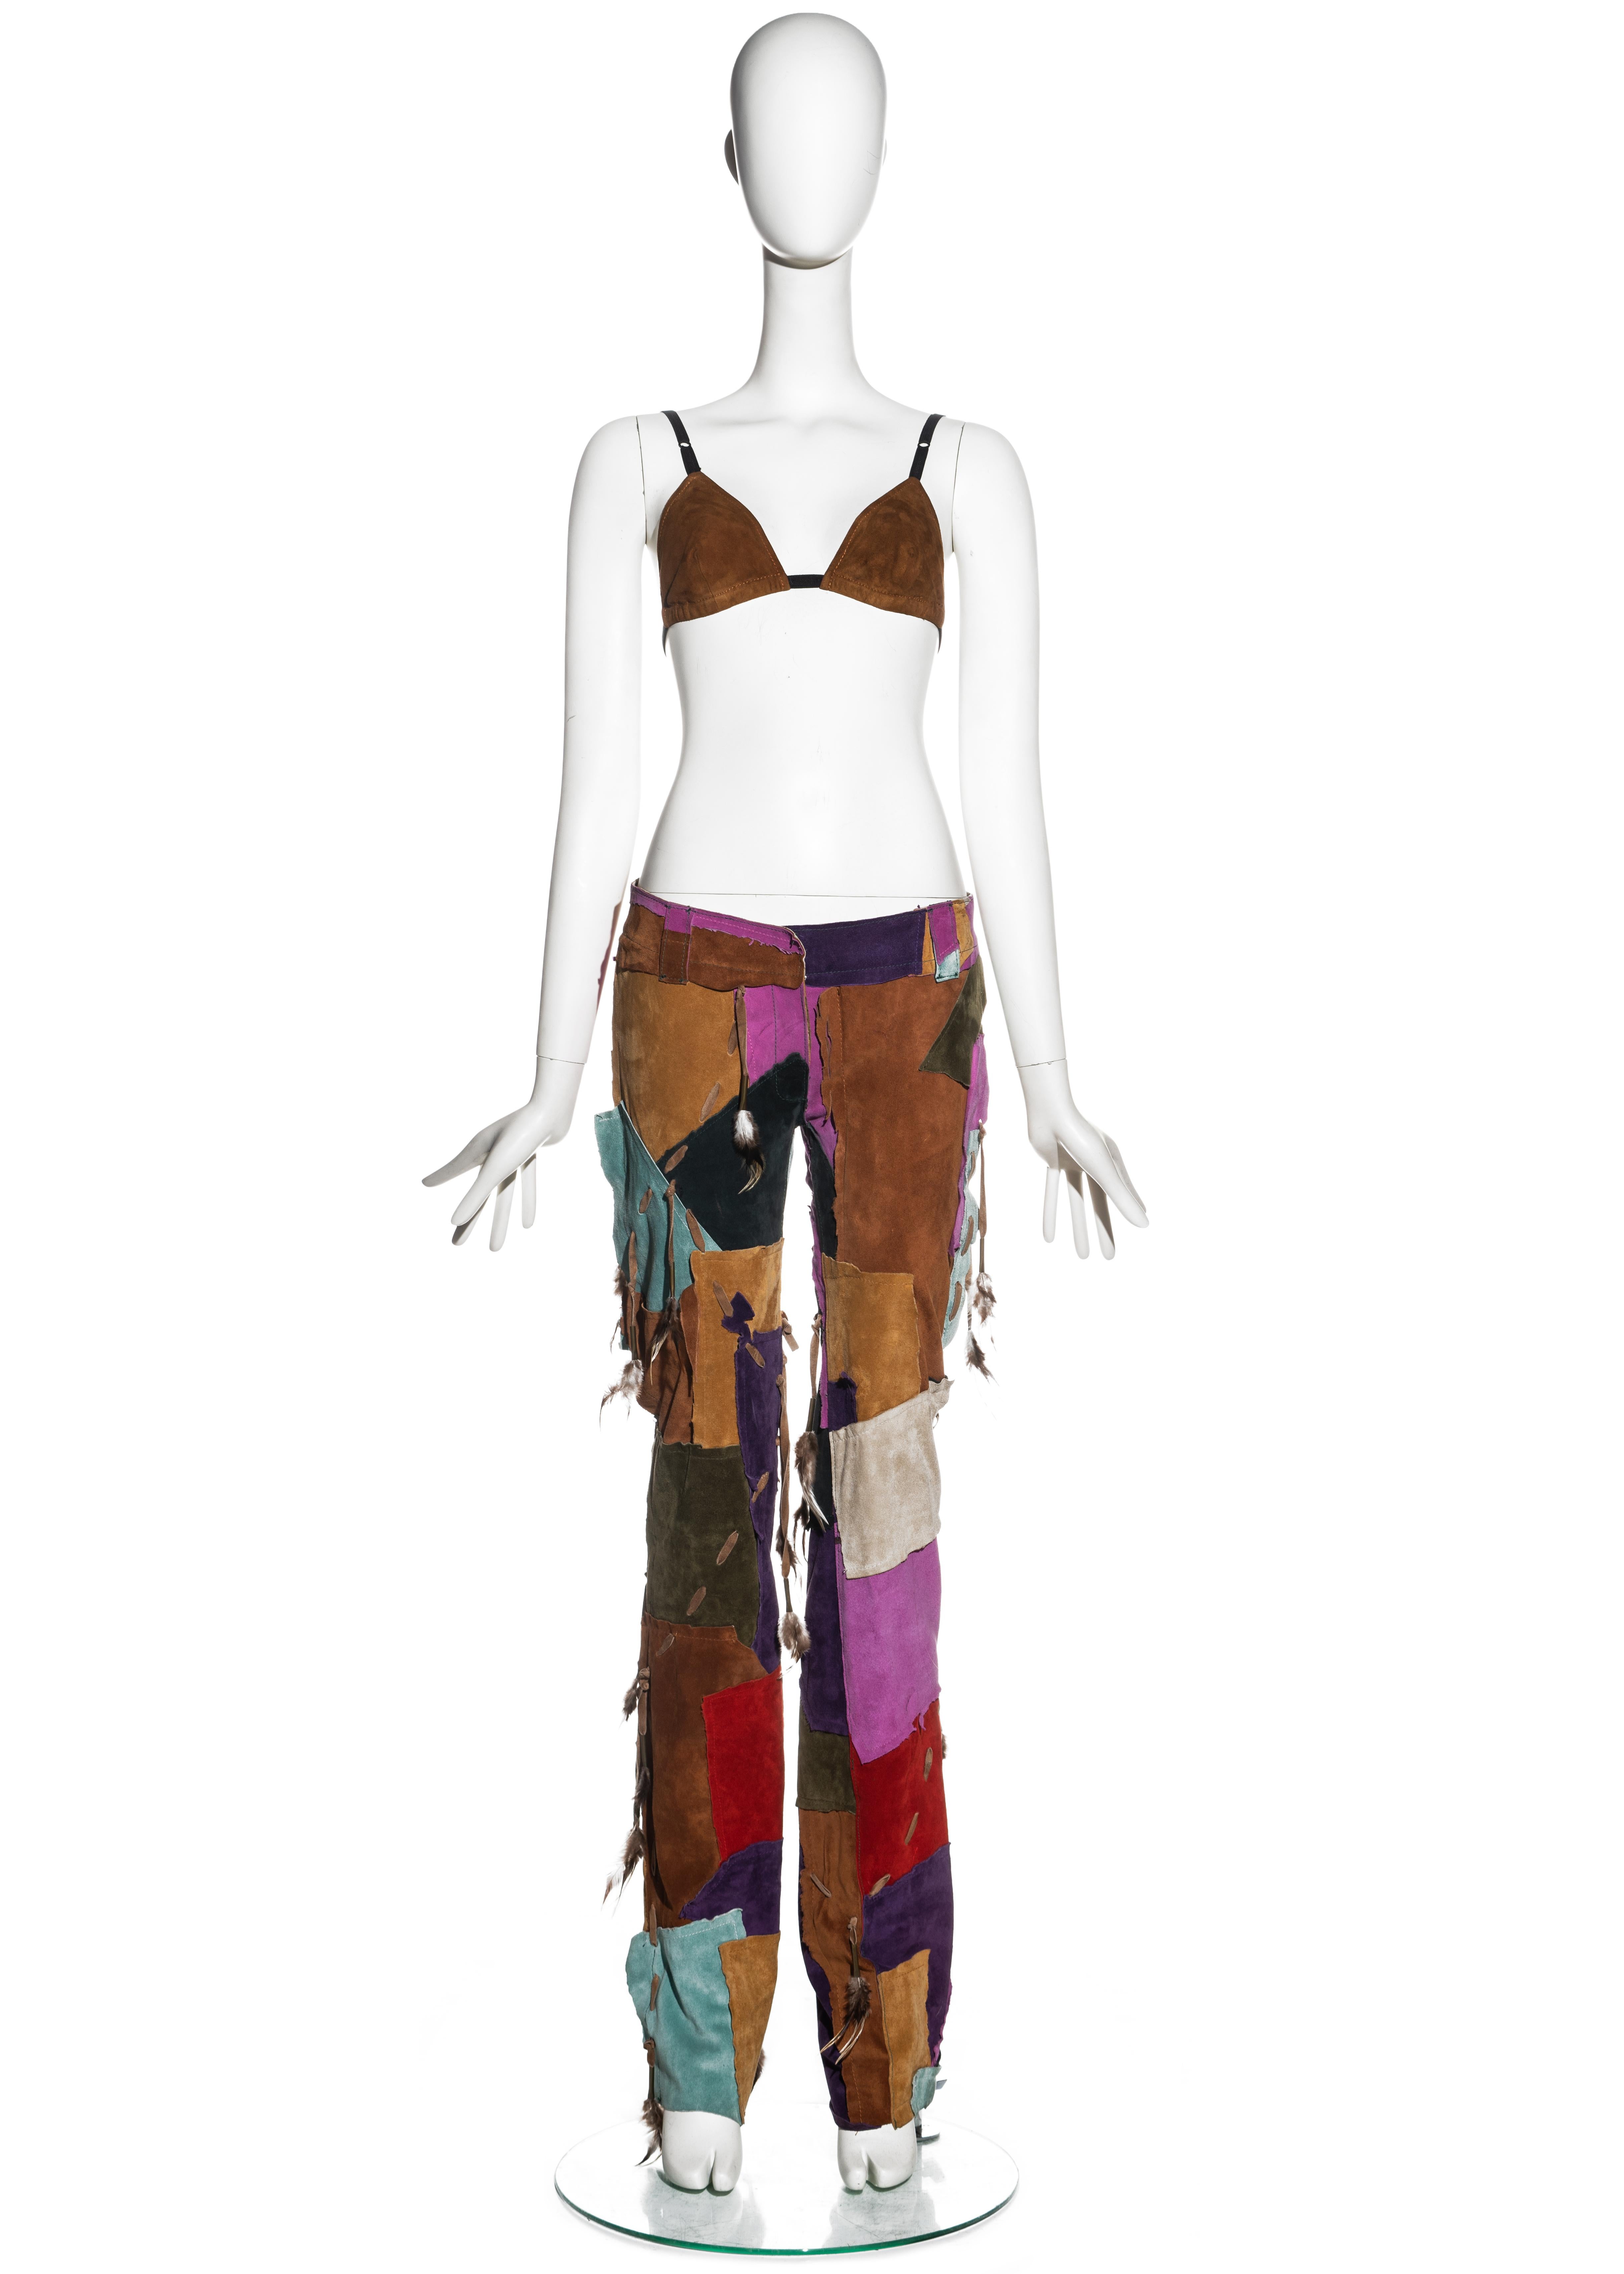 ▪ Dolce & Gabbana multicoloured pants and bra set
▪ 100% Leather
▪ Brown suede bra with adjustable shoulder straps 
▪ Multicoloured patchwork straight-leg pants 
▪ Decorative stitching detail with feathers 
▪ Labelled as a unique piece (Capo Unico);